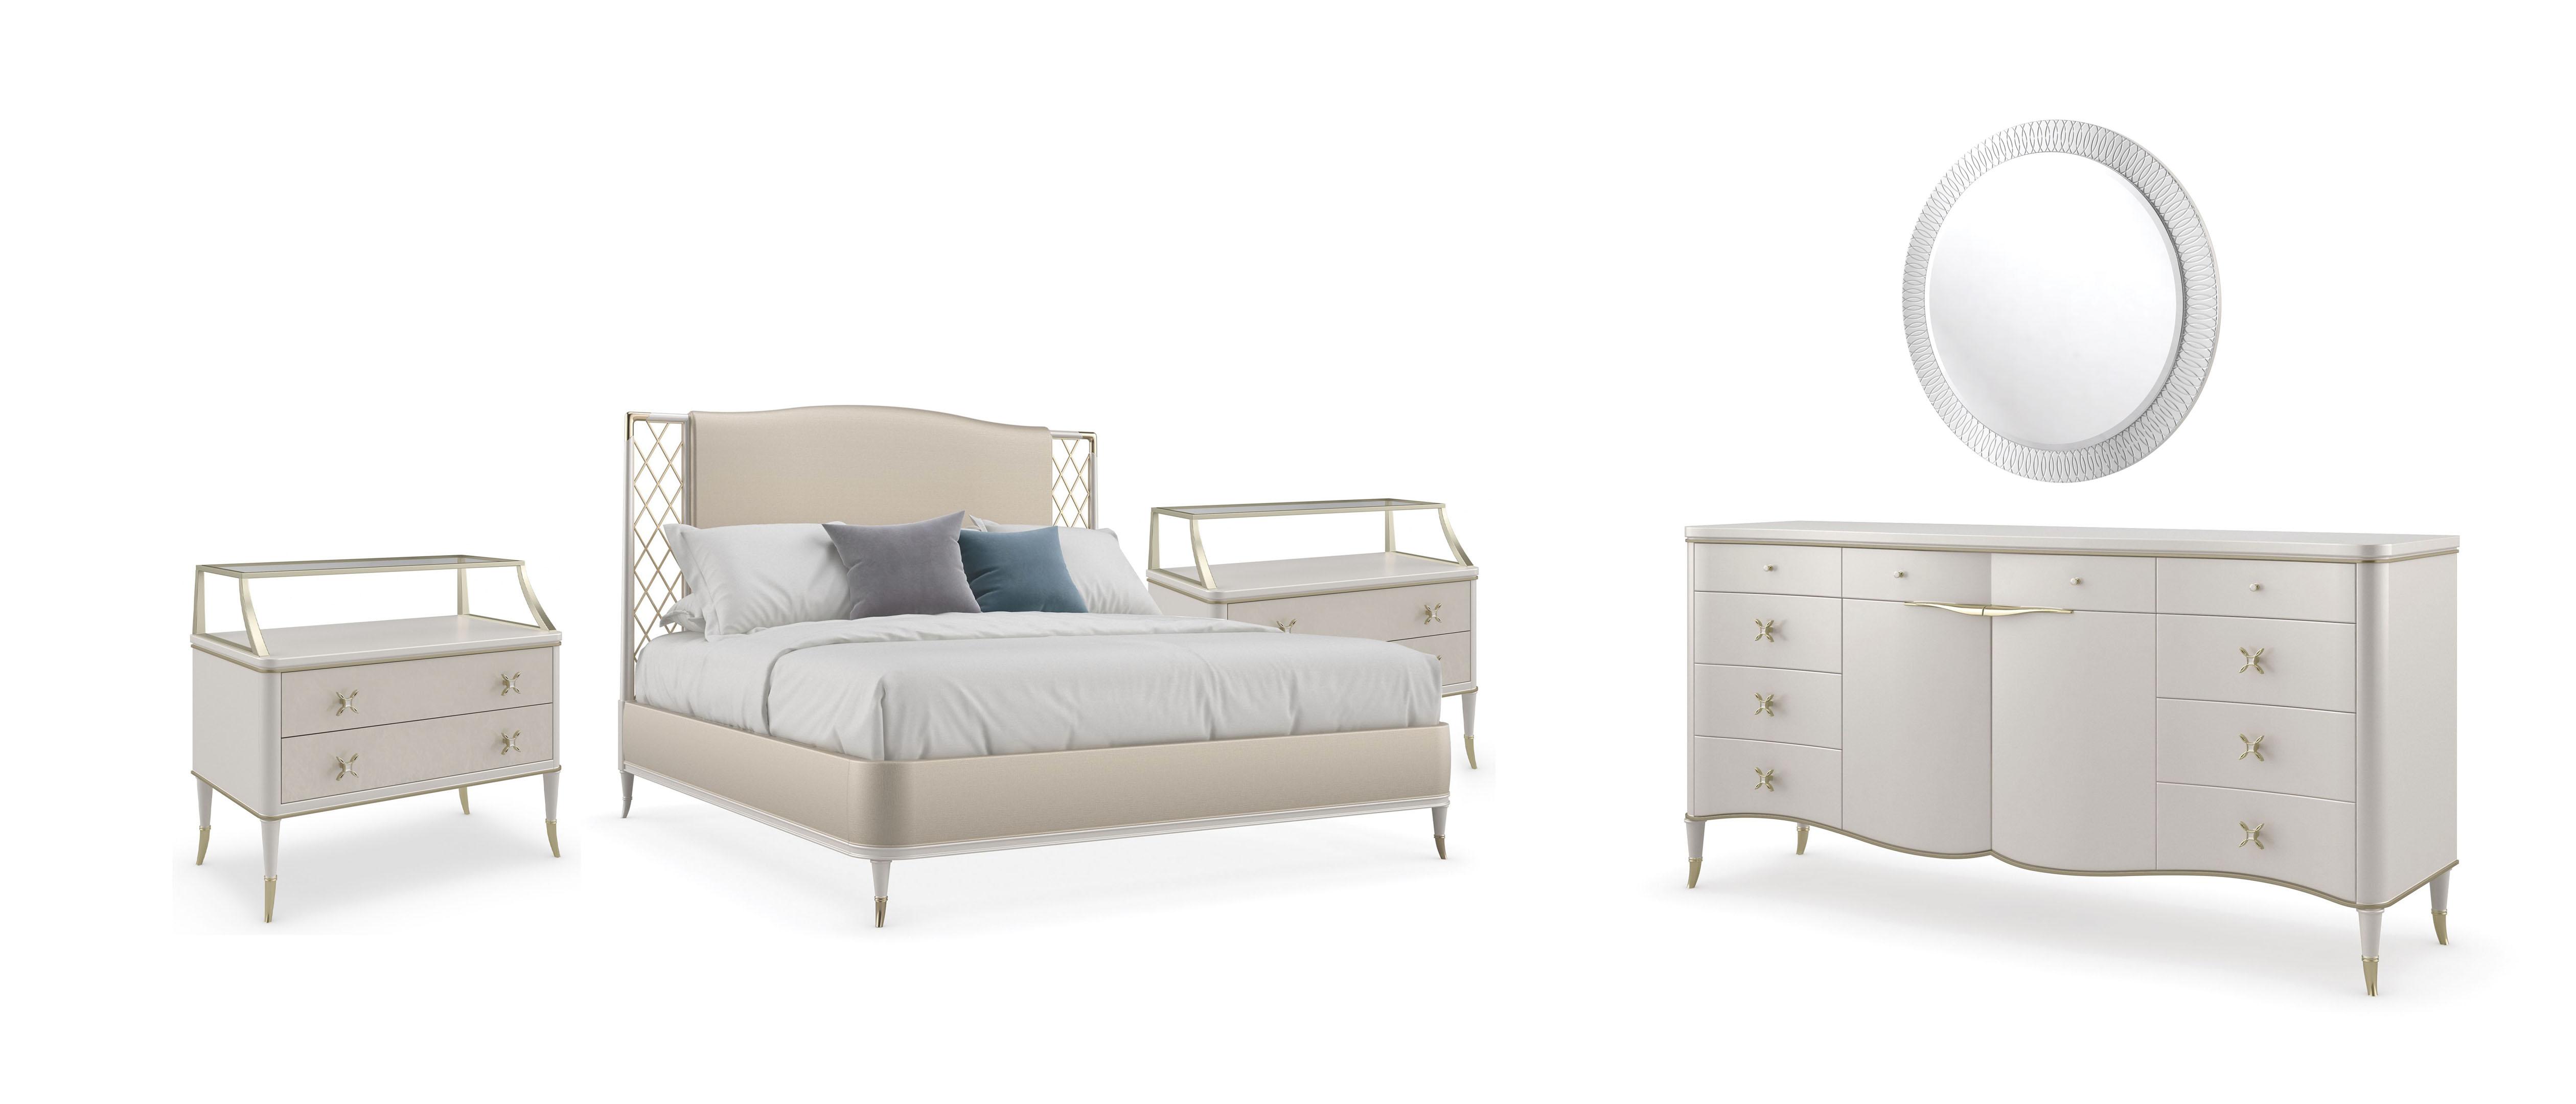 Contemporary Platform Bedroom Set STAR OF THE NIGHT-KING / ALL DOLLED UP / BELLE OF THE BALL / PAST REFLECTIONS CLA-021-121-2NDM-5PC in Cream, Gold Velvet